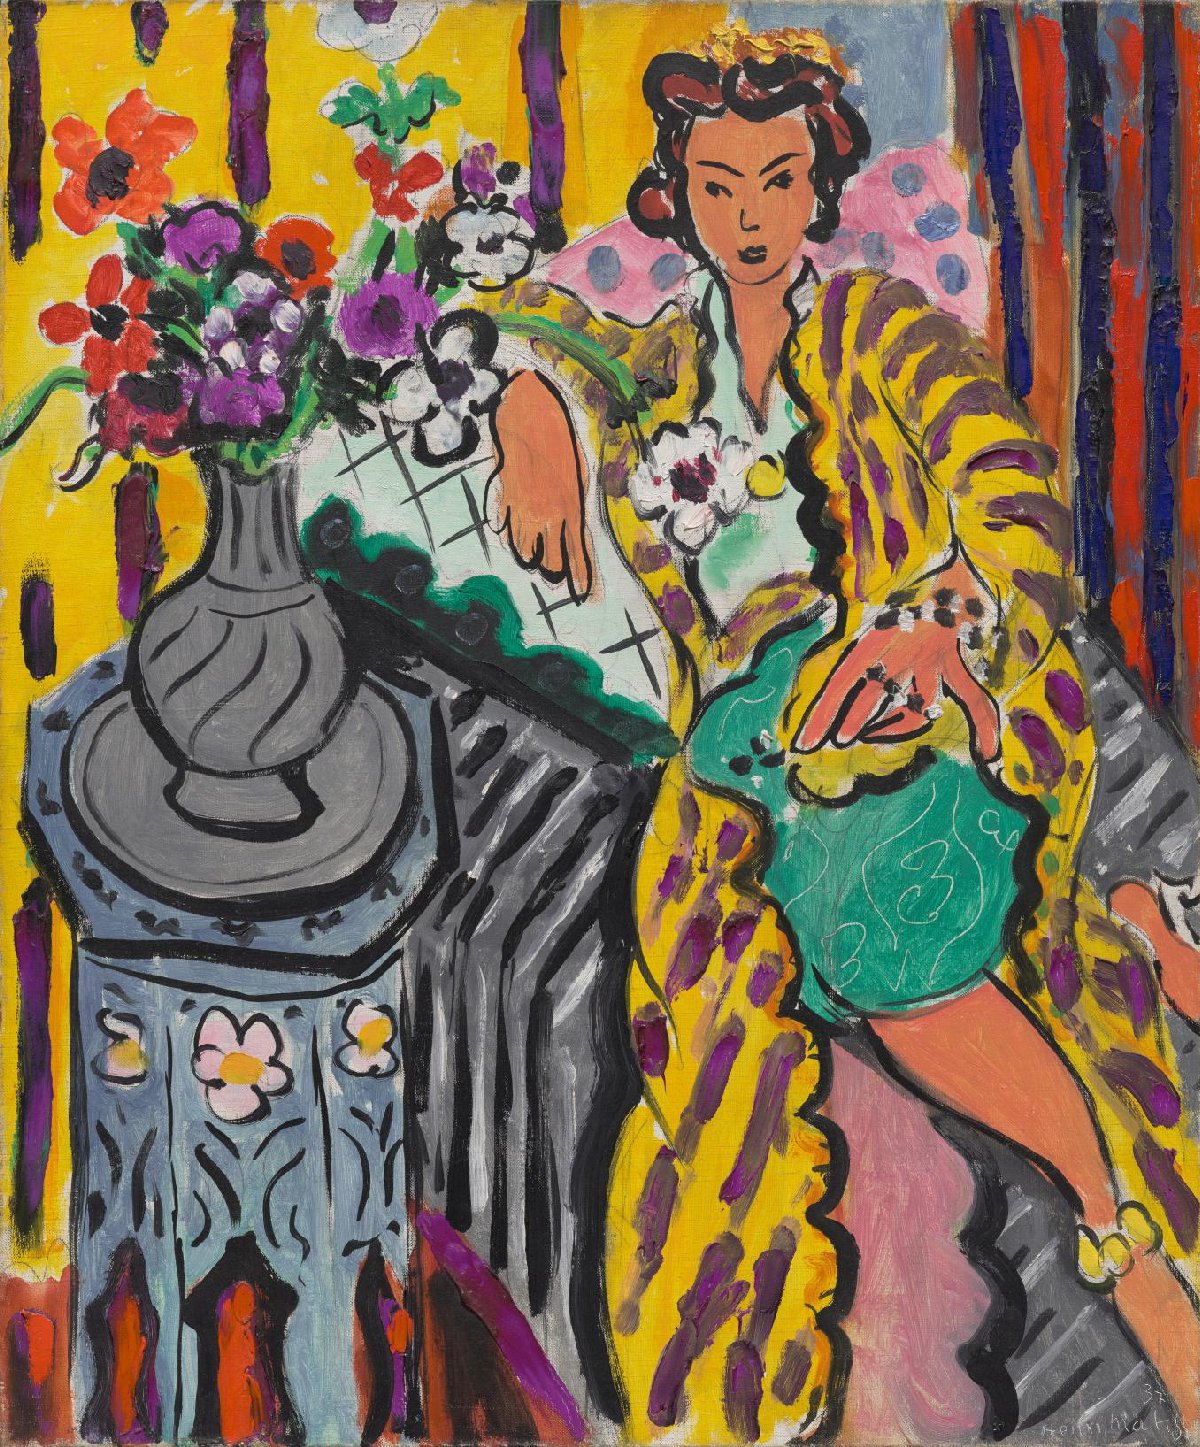 A painting shows a woman in a yellow and purple striped robe with green knee-high pants sitting in a pink armchair. A vase of flowers sits nearby.